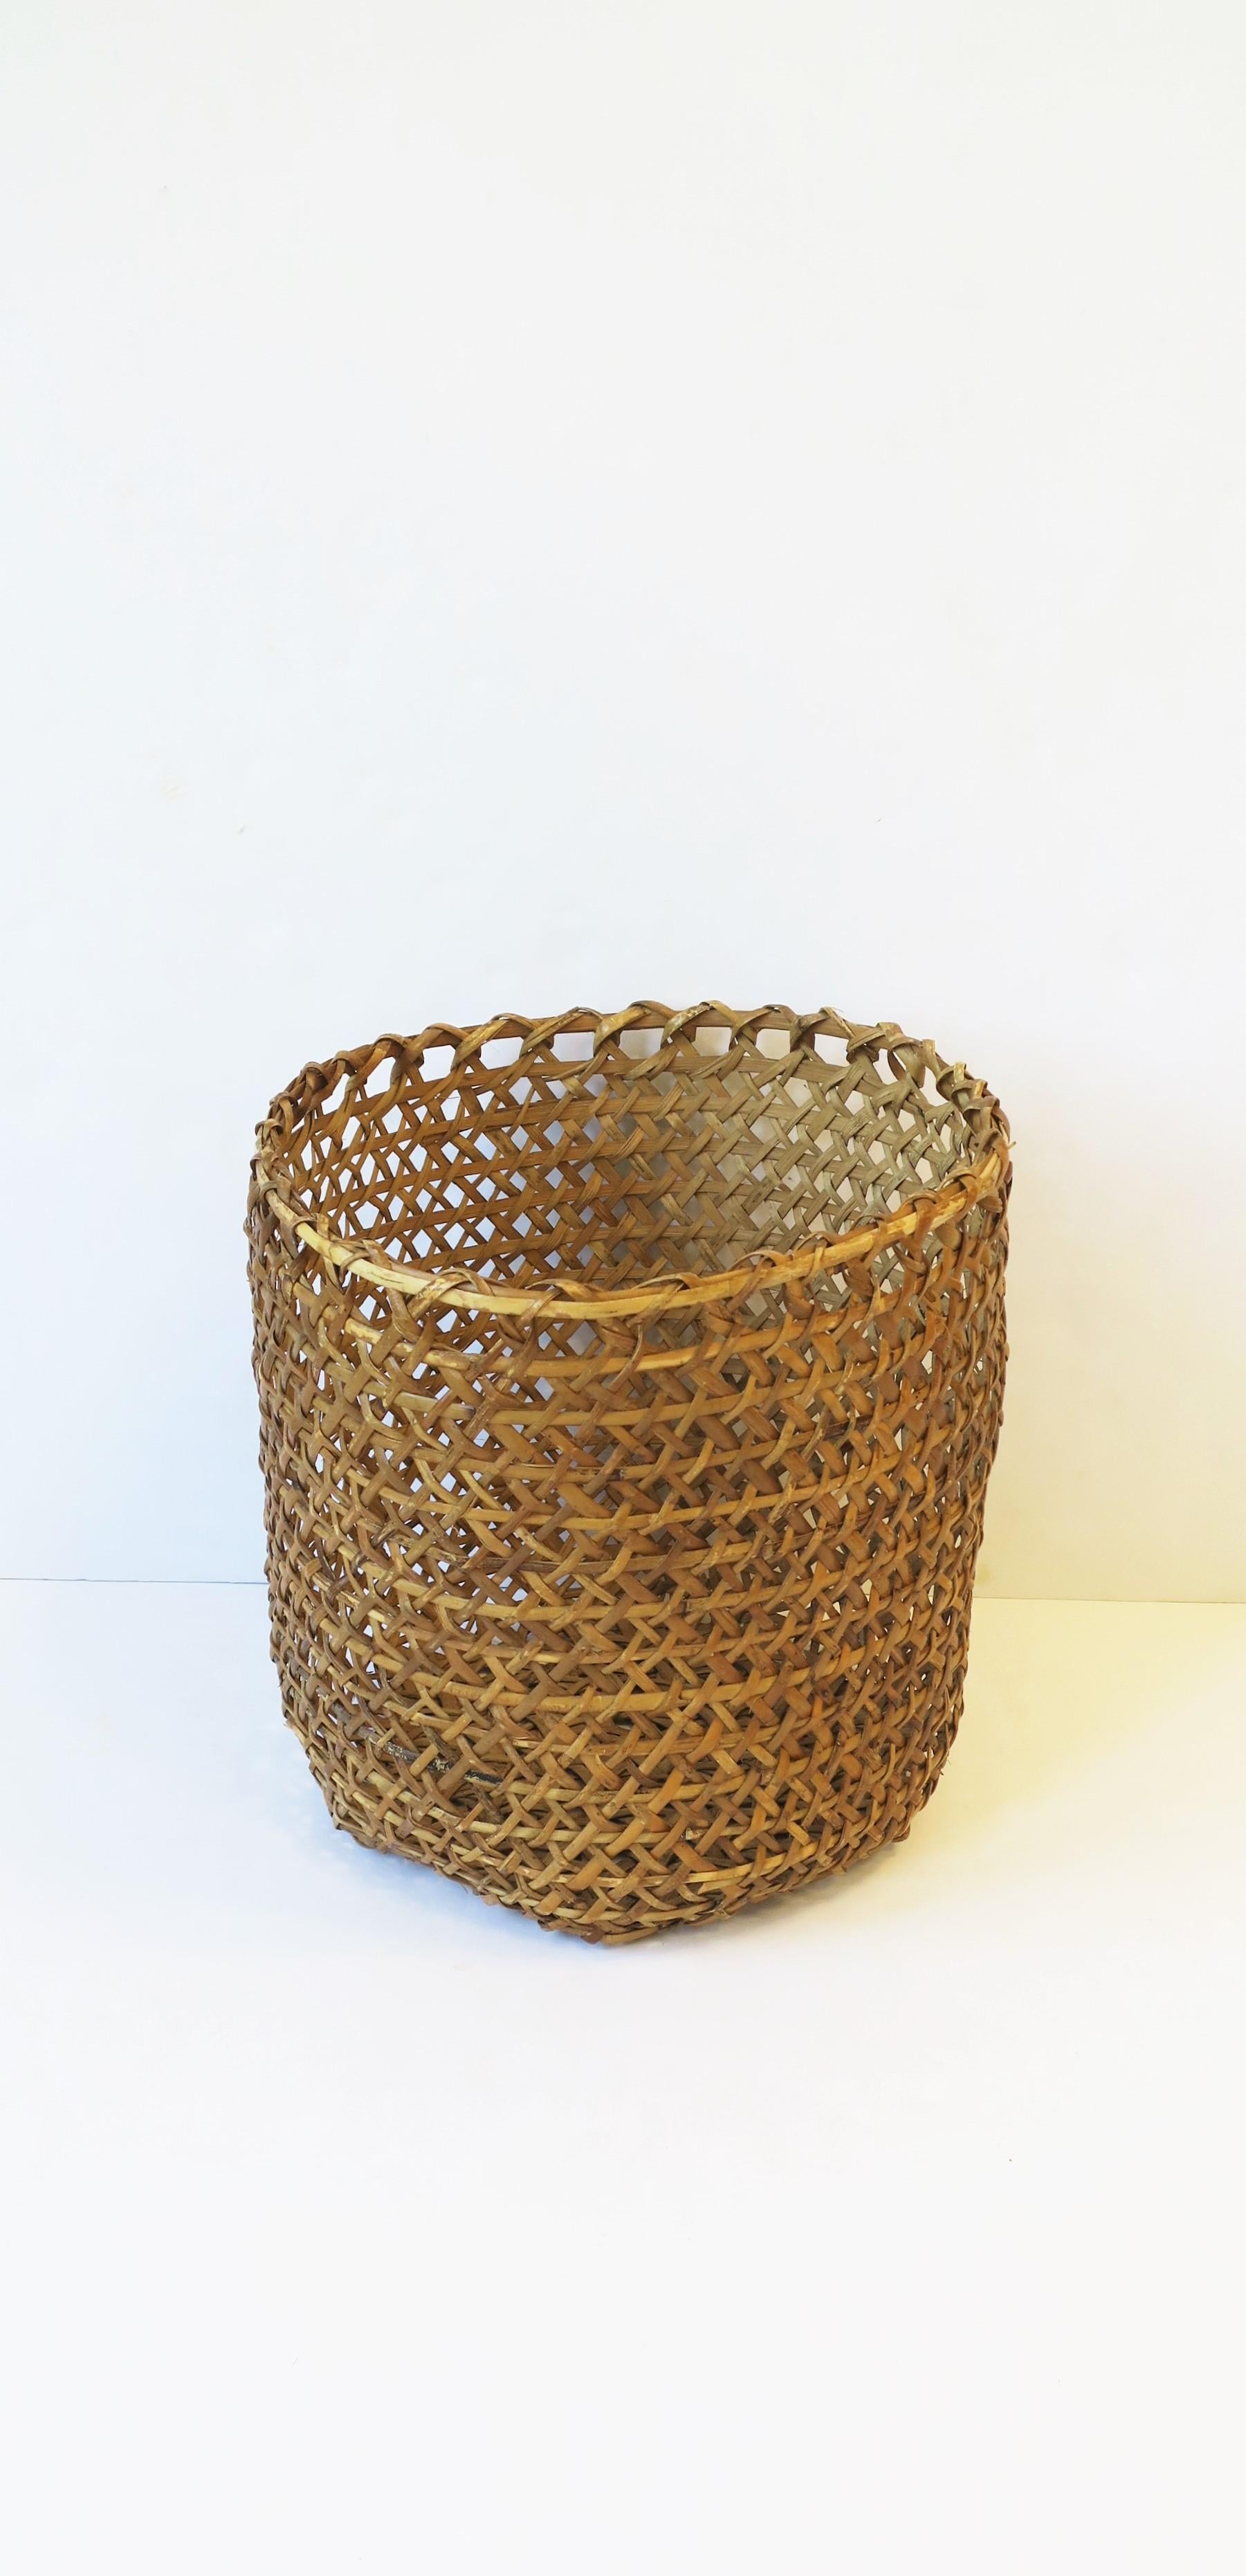 A beautiful hand-weaved vintage wicker 'basket' planter cachepot (plant pot holder) or wastebasket trash can, circa mid to late-20th century. Dimensions: 13